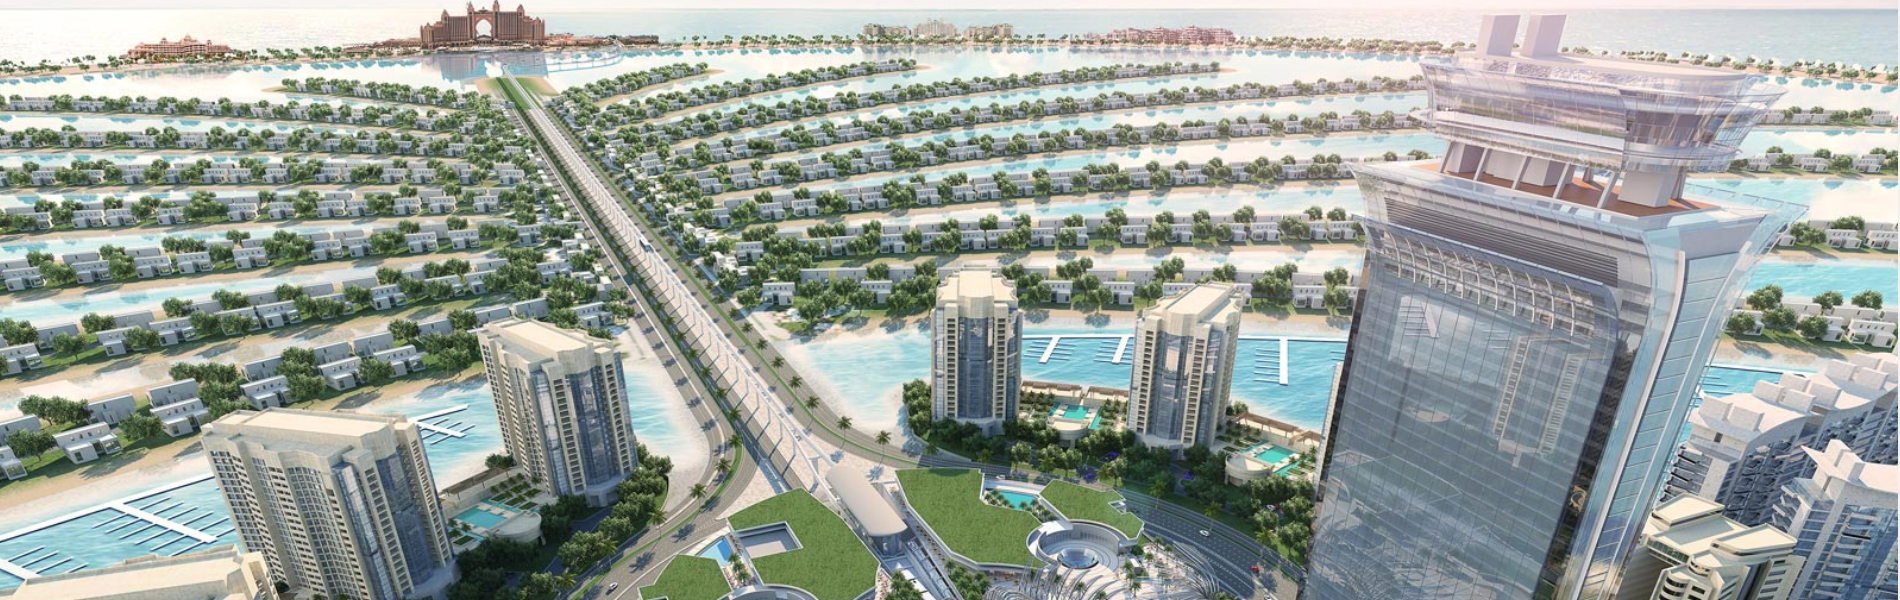 THE PALM TOWER by Nakheel Properties